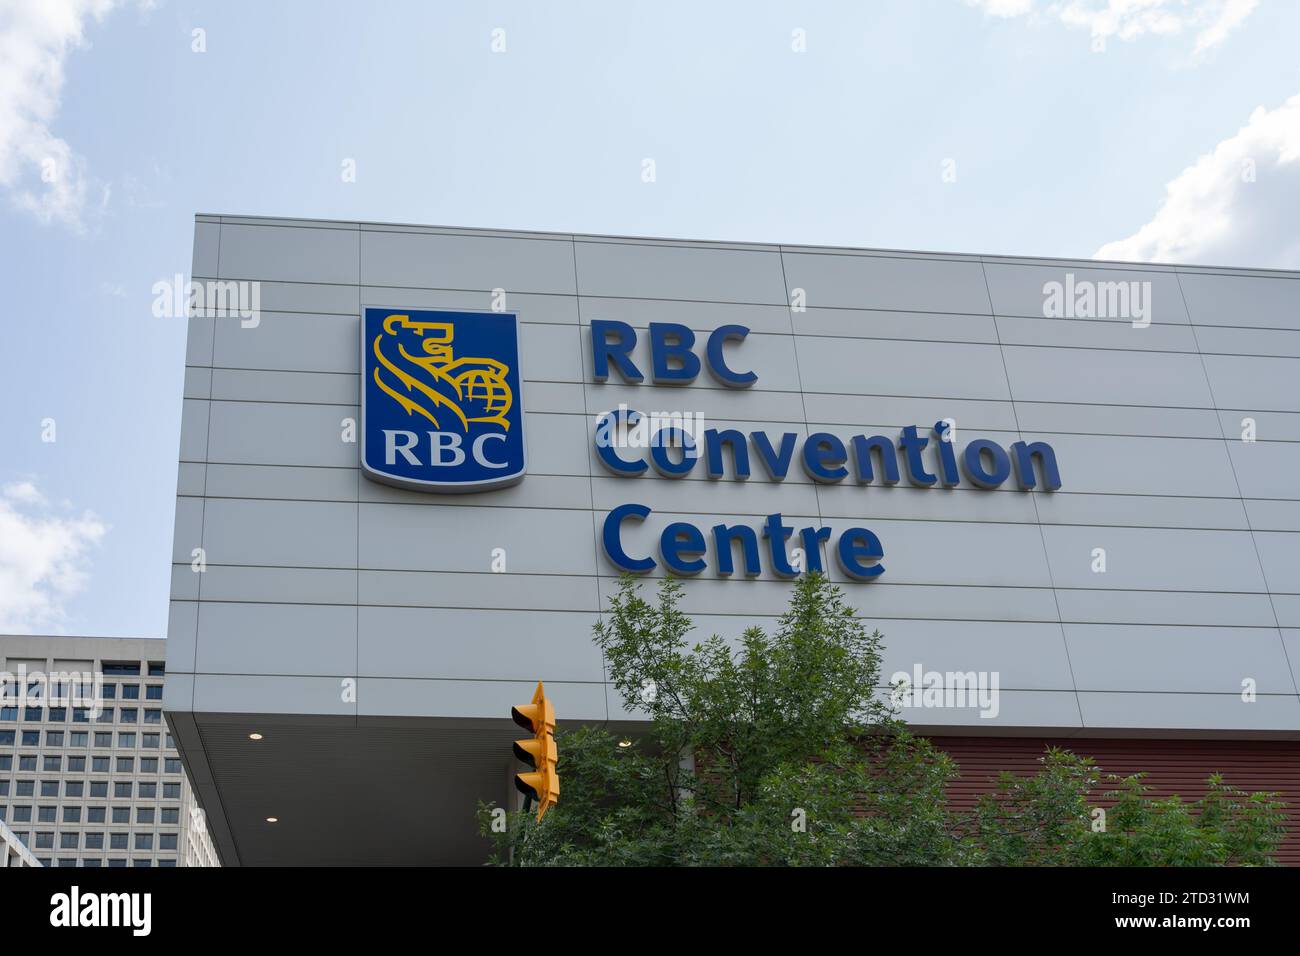 The sign on the RBC Convention Centre building in Winnipeg, Manitoba, Canada Stock Photo